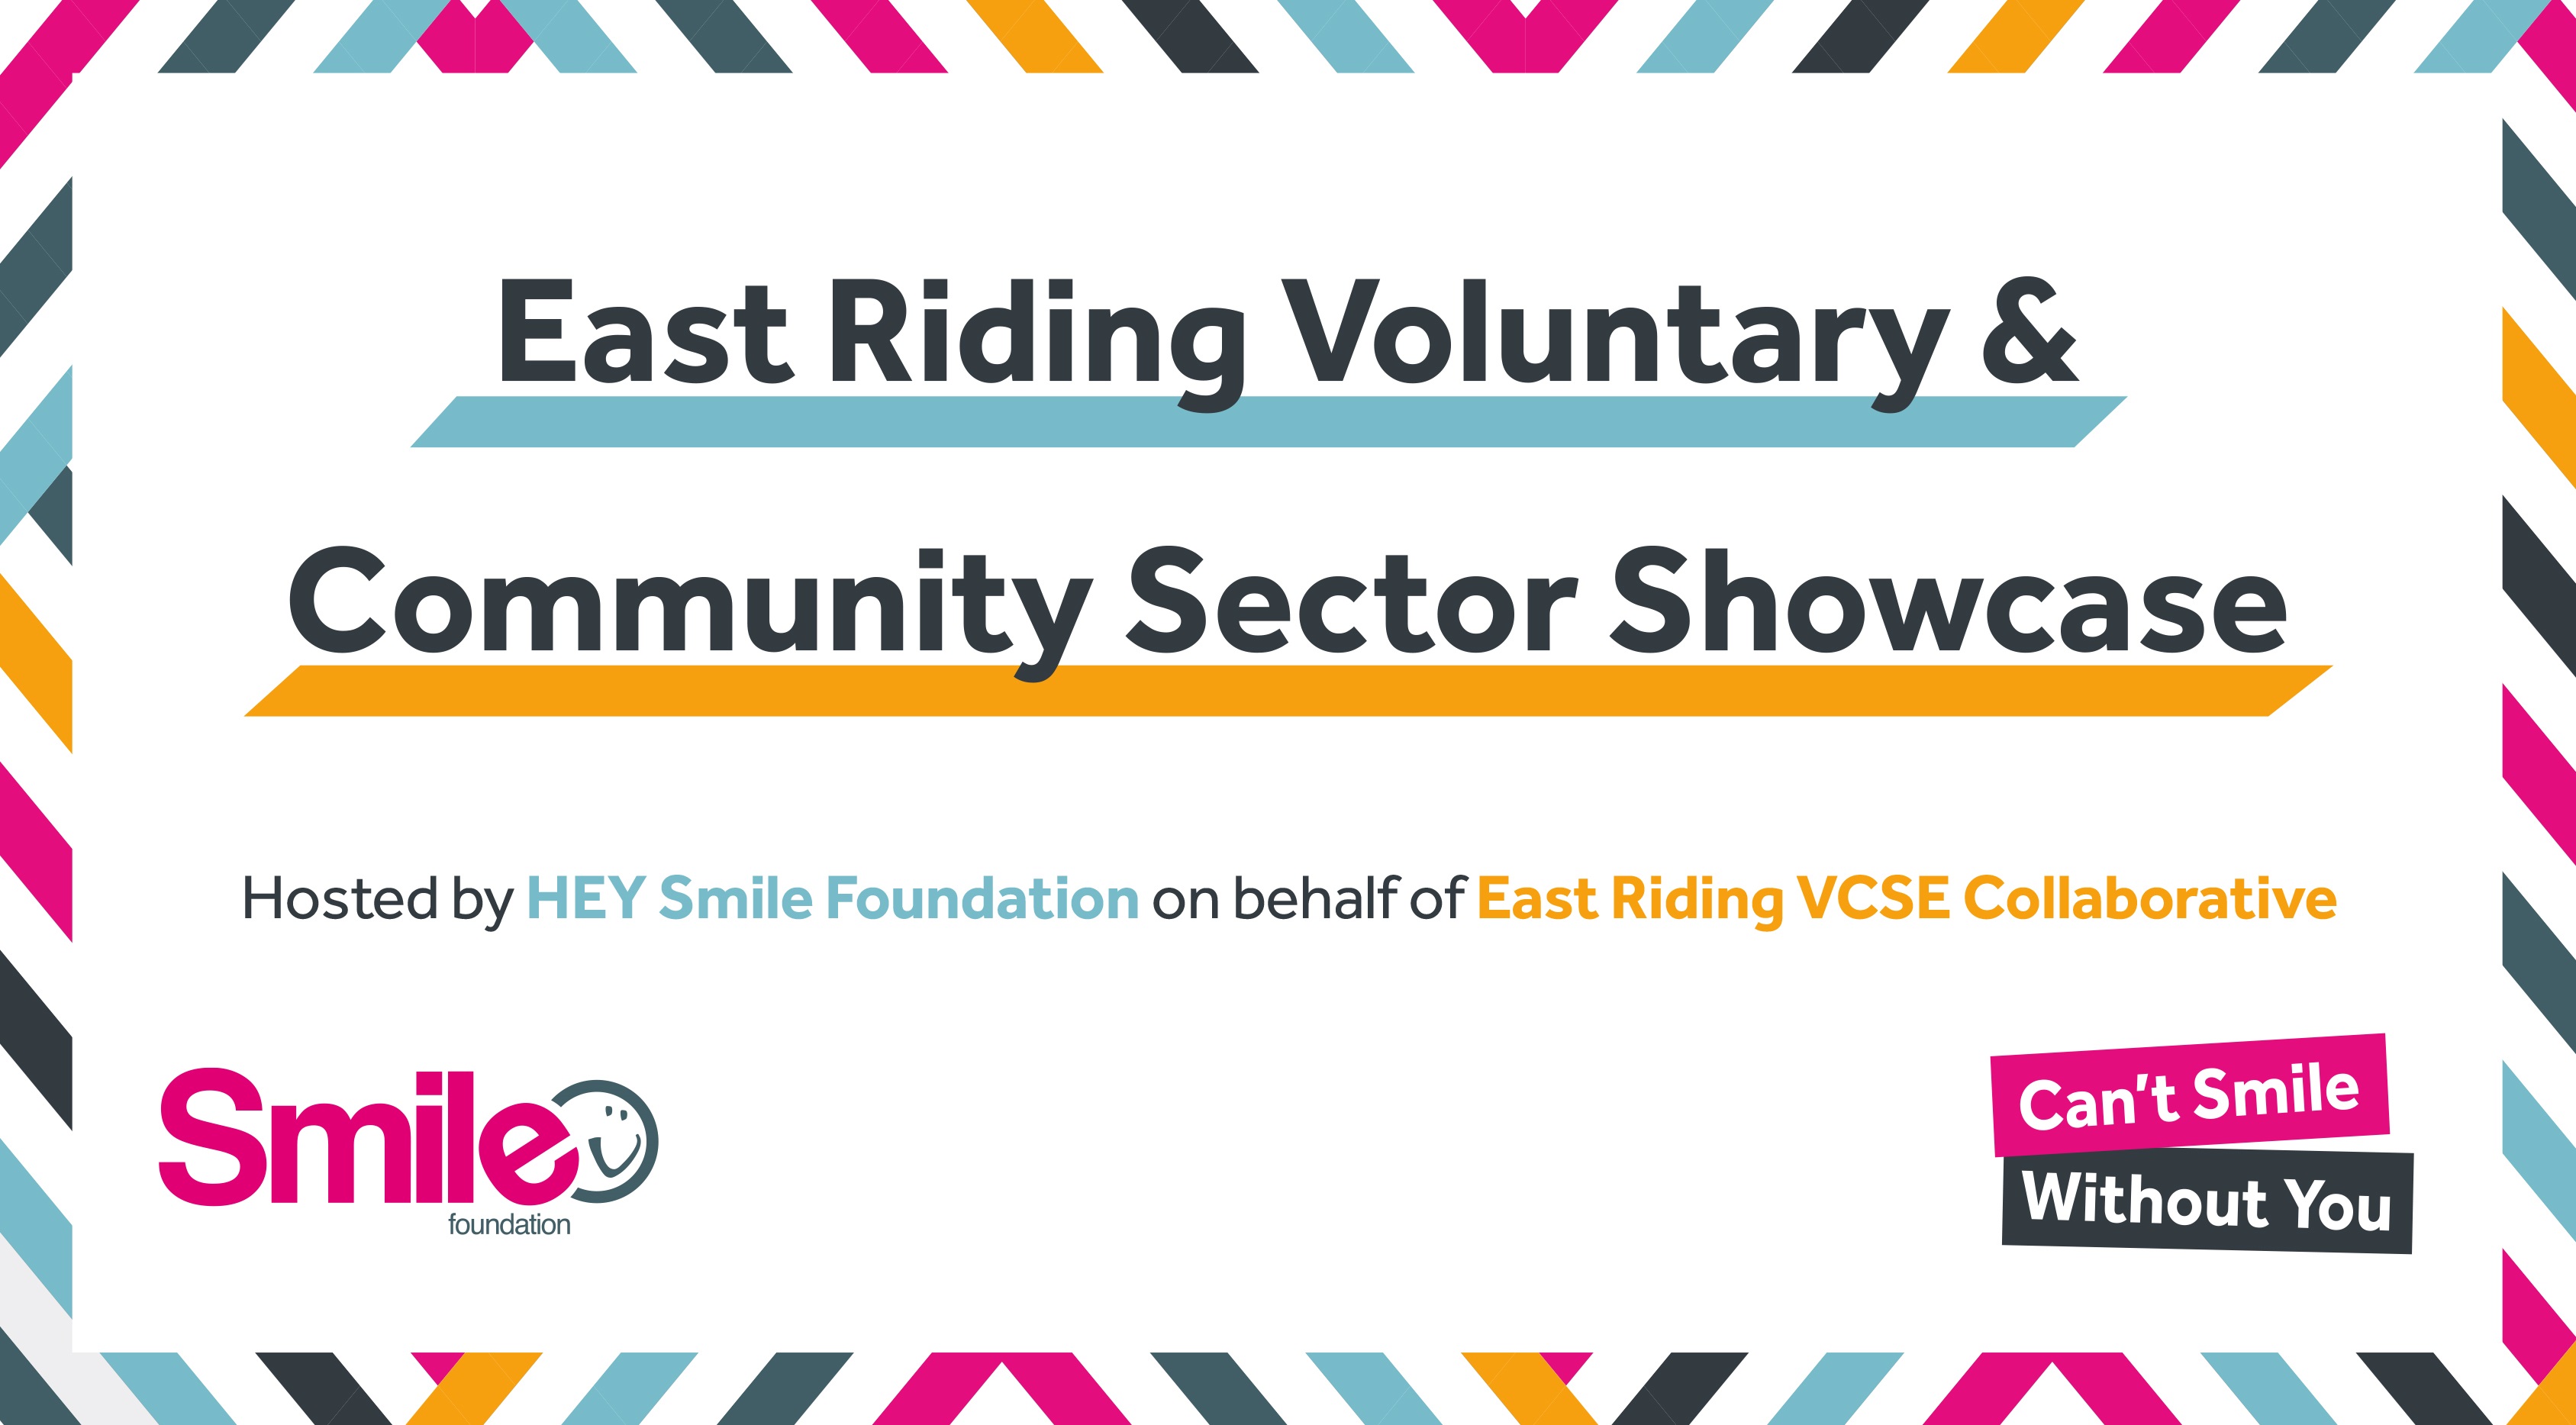 East Riding Voluntary and Community Sector Showcase